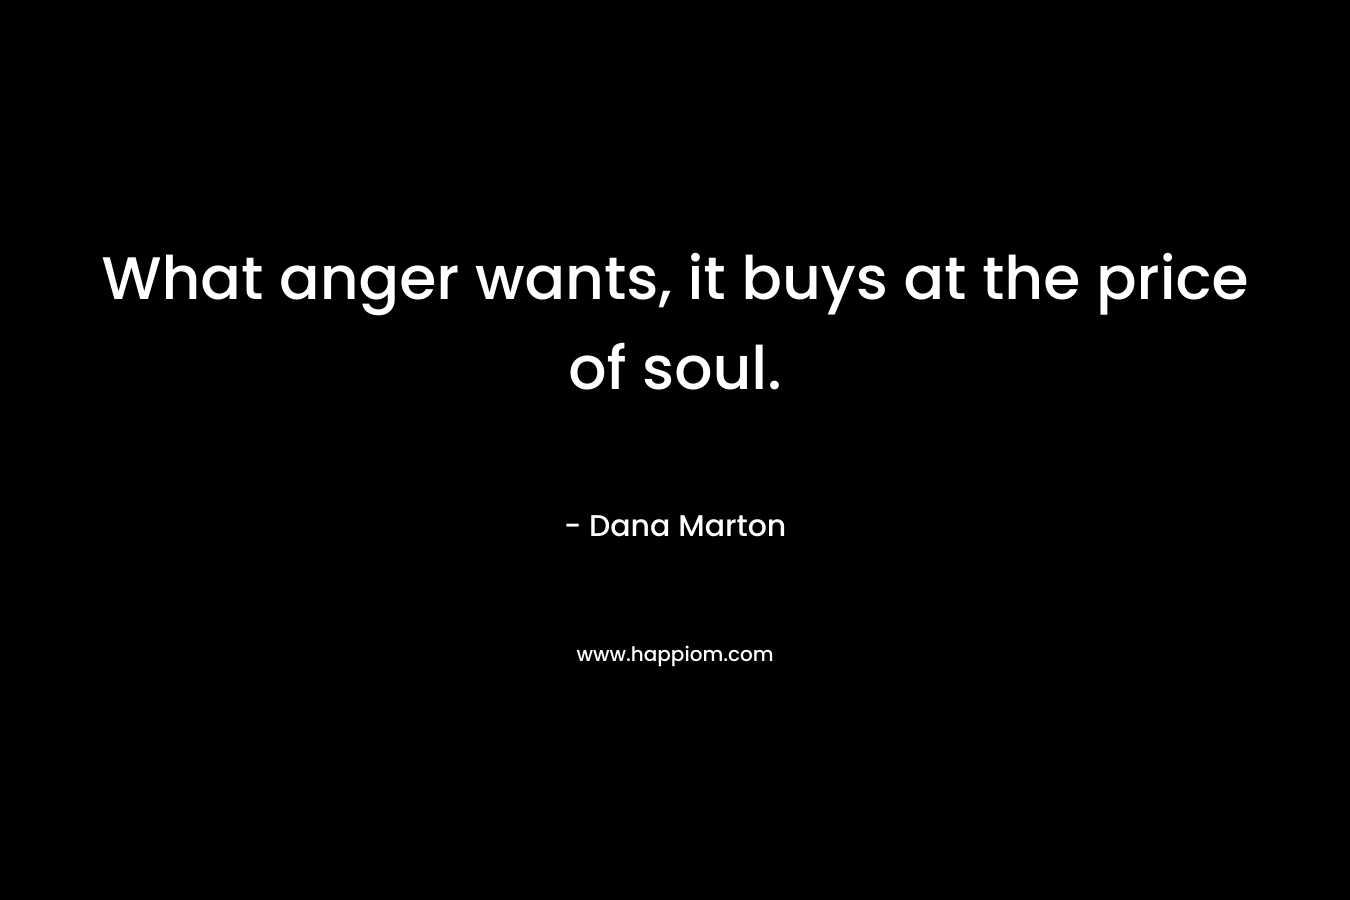 What anger wants, it buys at the price of soul. – Dana Marton